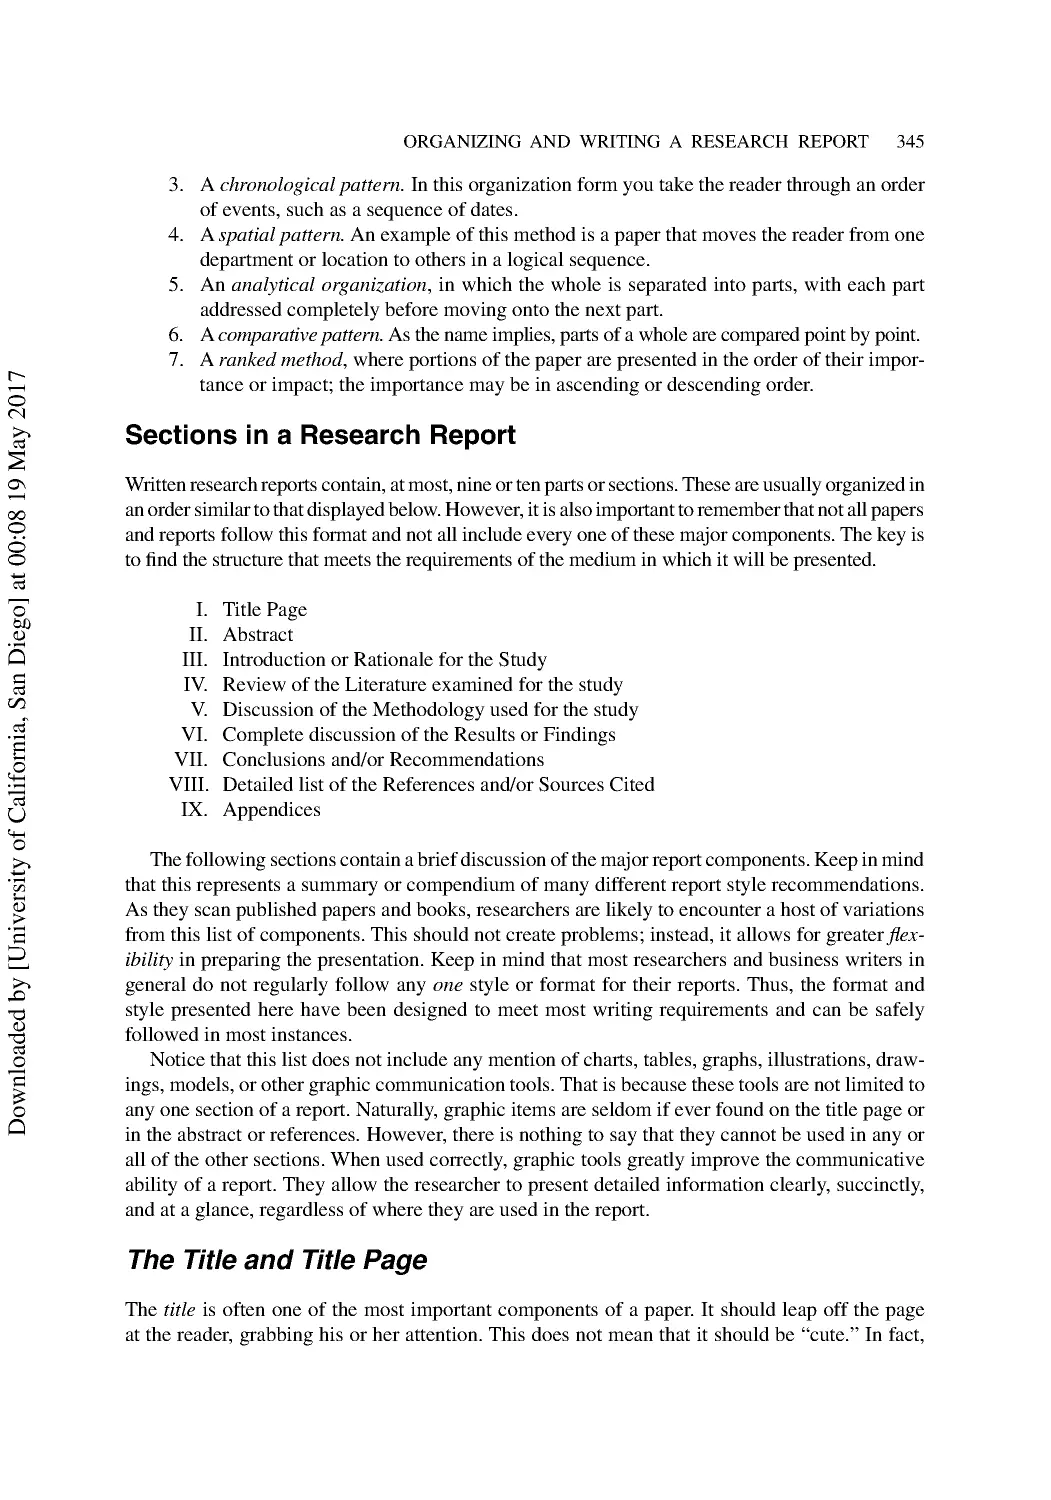 Sections in a Research Report